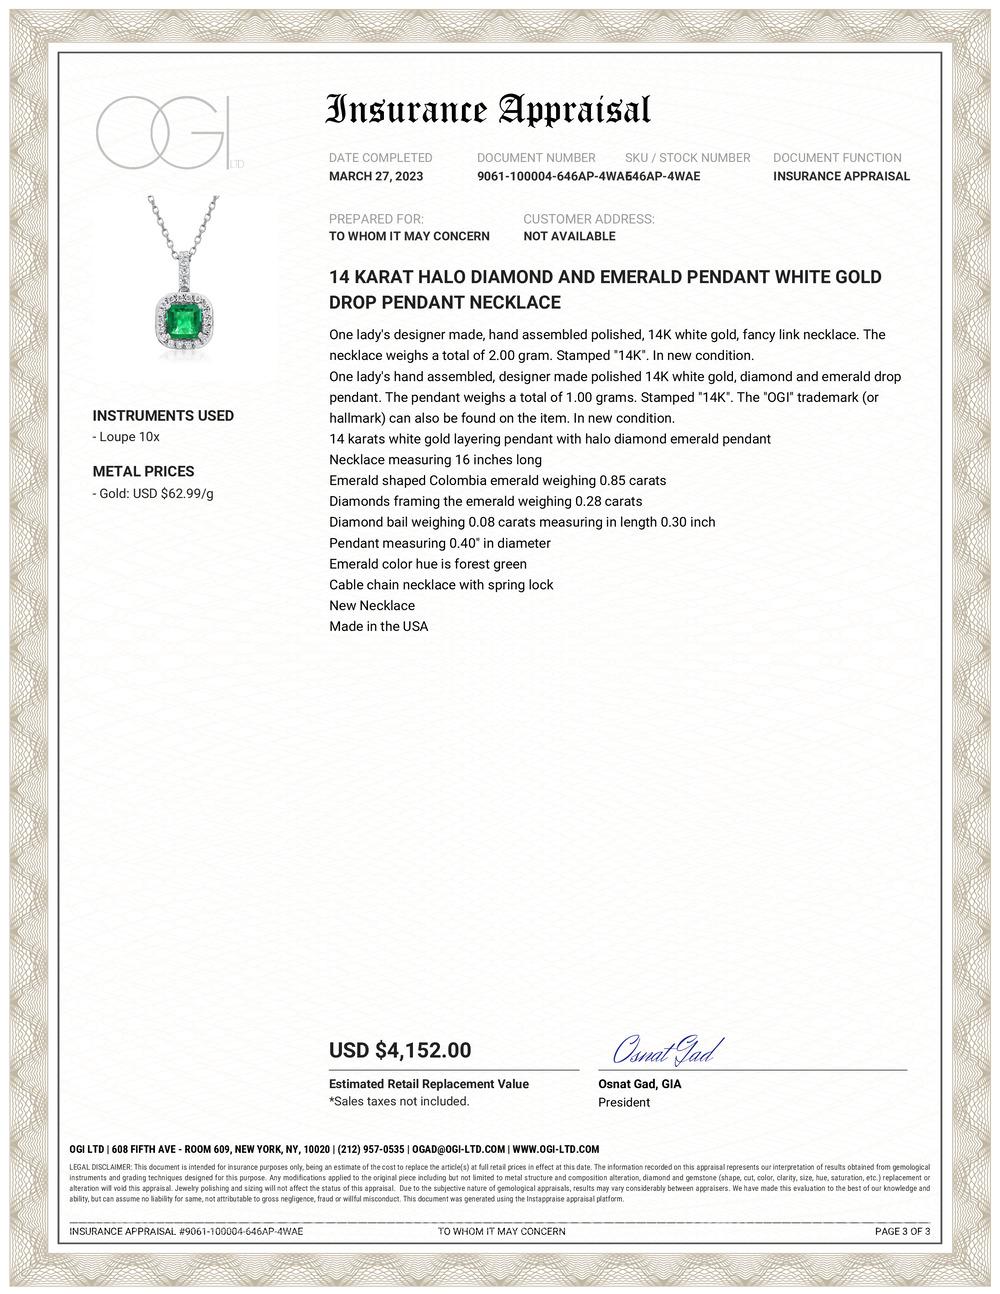 14 karats white gold layering pendant with halo diamond emerald pendant 
Necklace measuring 16 inches long
Emerald shaped Colombia  emerald weighing 0.85 carats
Diamonds framing the emerald weighing 0.28 carats
Diamond bail weighing 0.08 carats